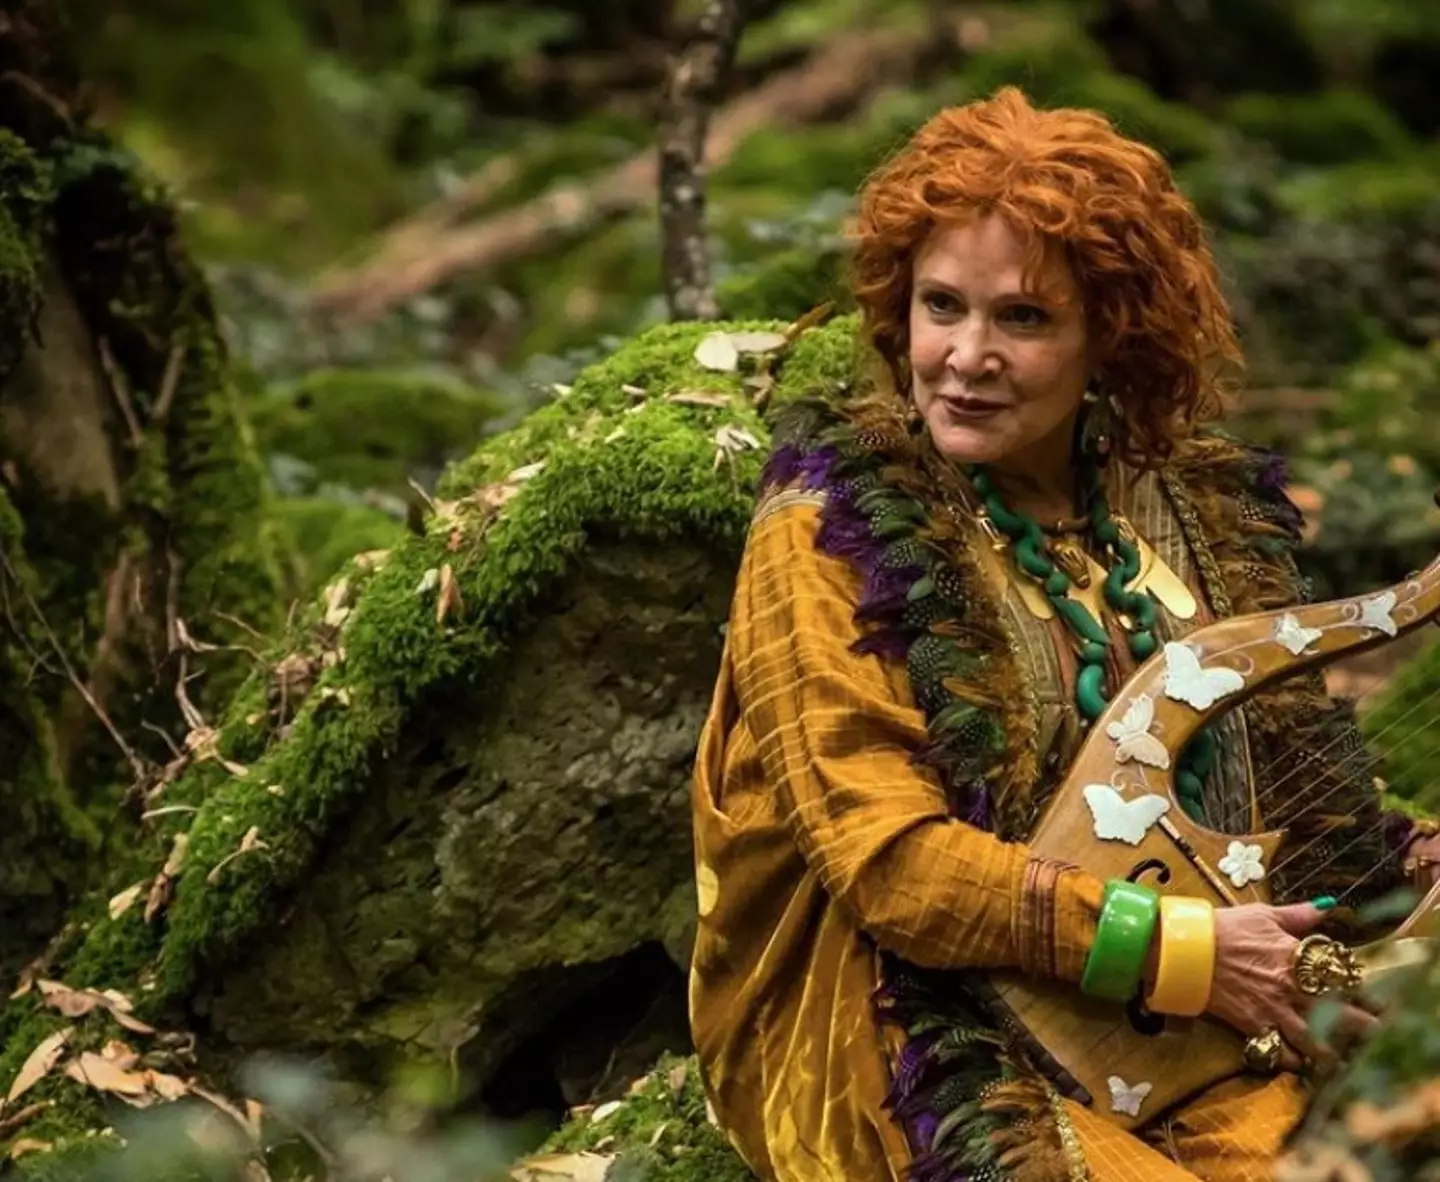 Fisher played 'extravagant and powerful witch of the forest' Hazel.